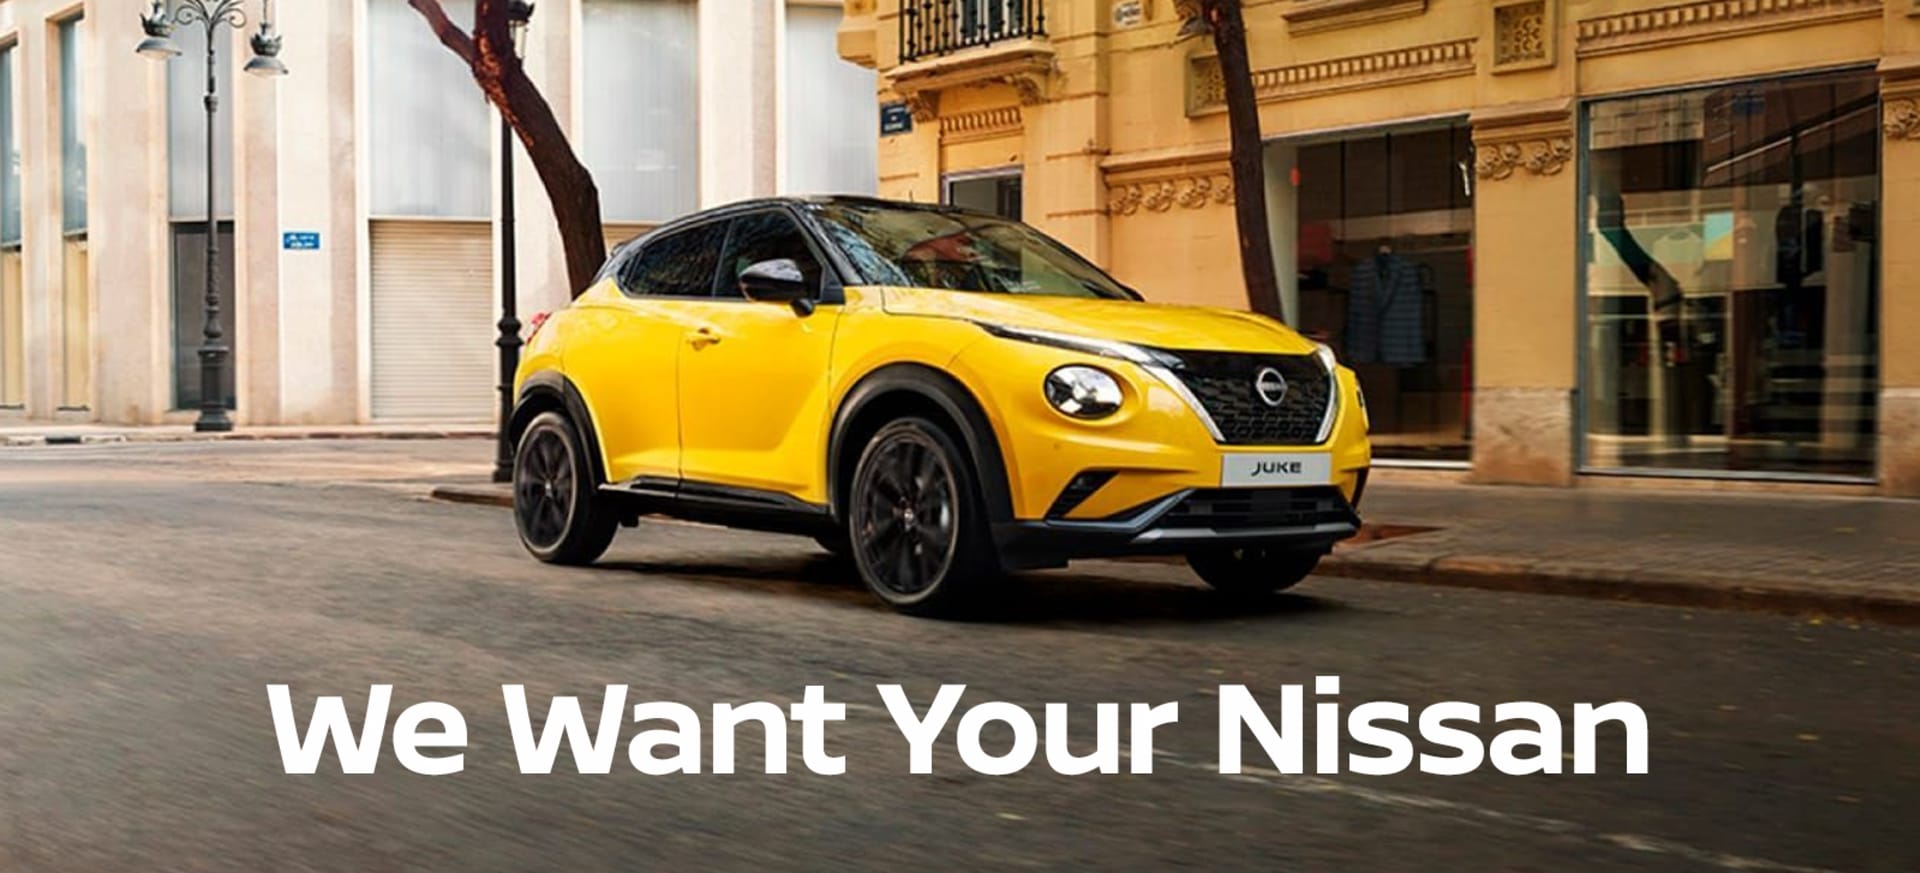 We Want Your Nissan